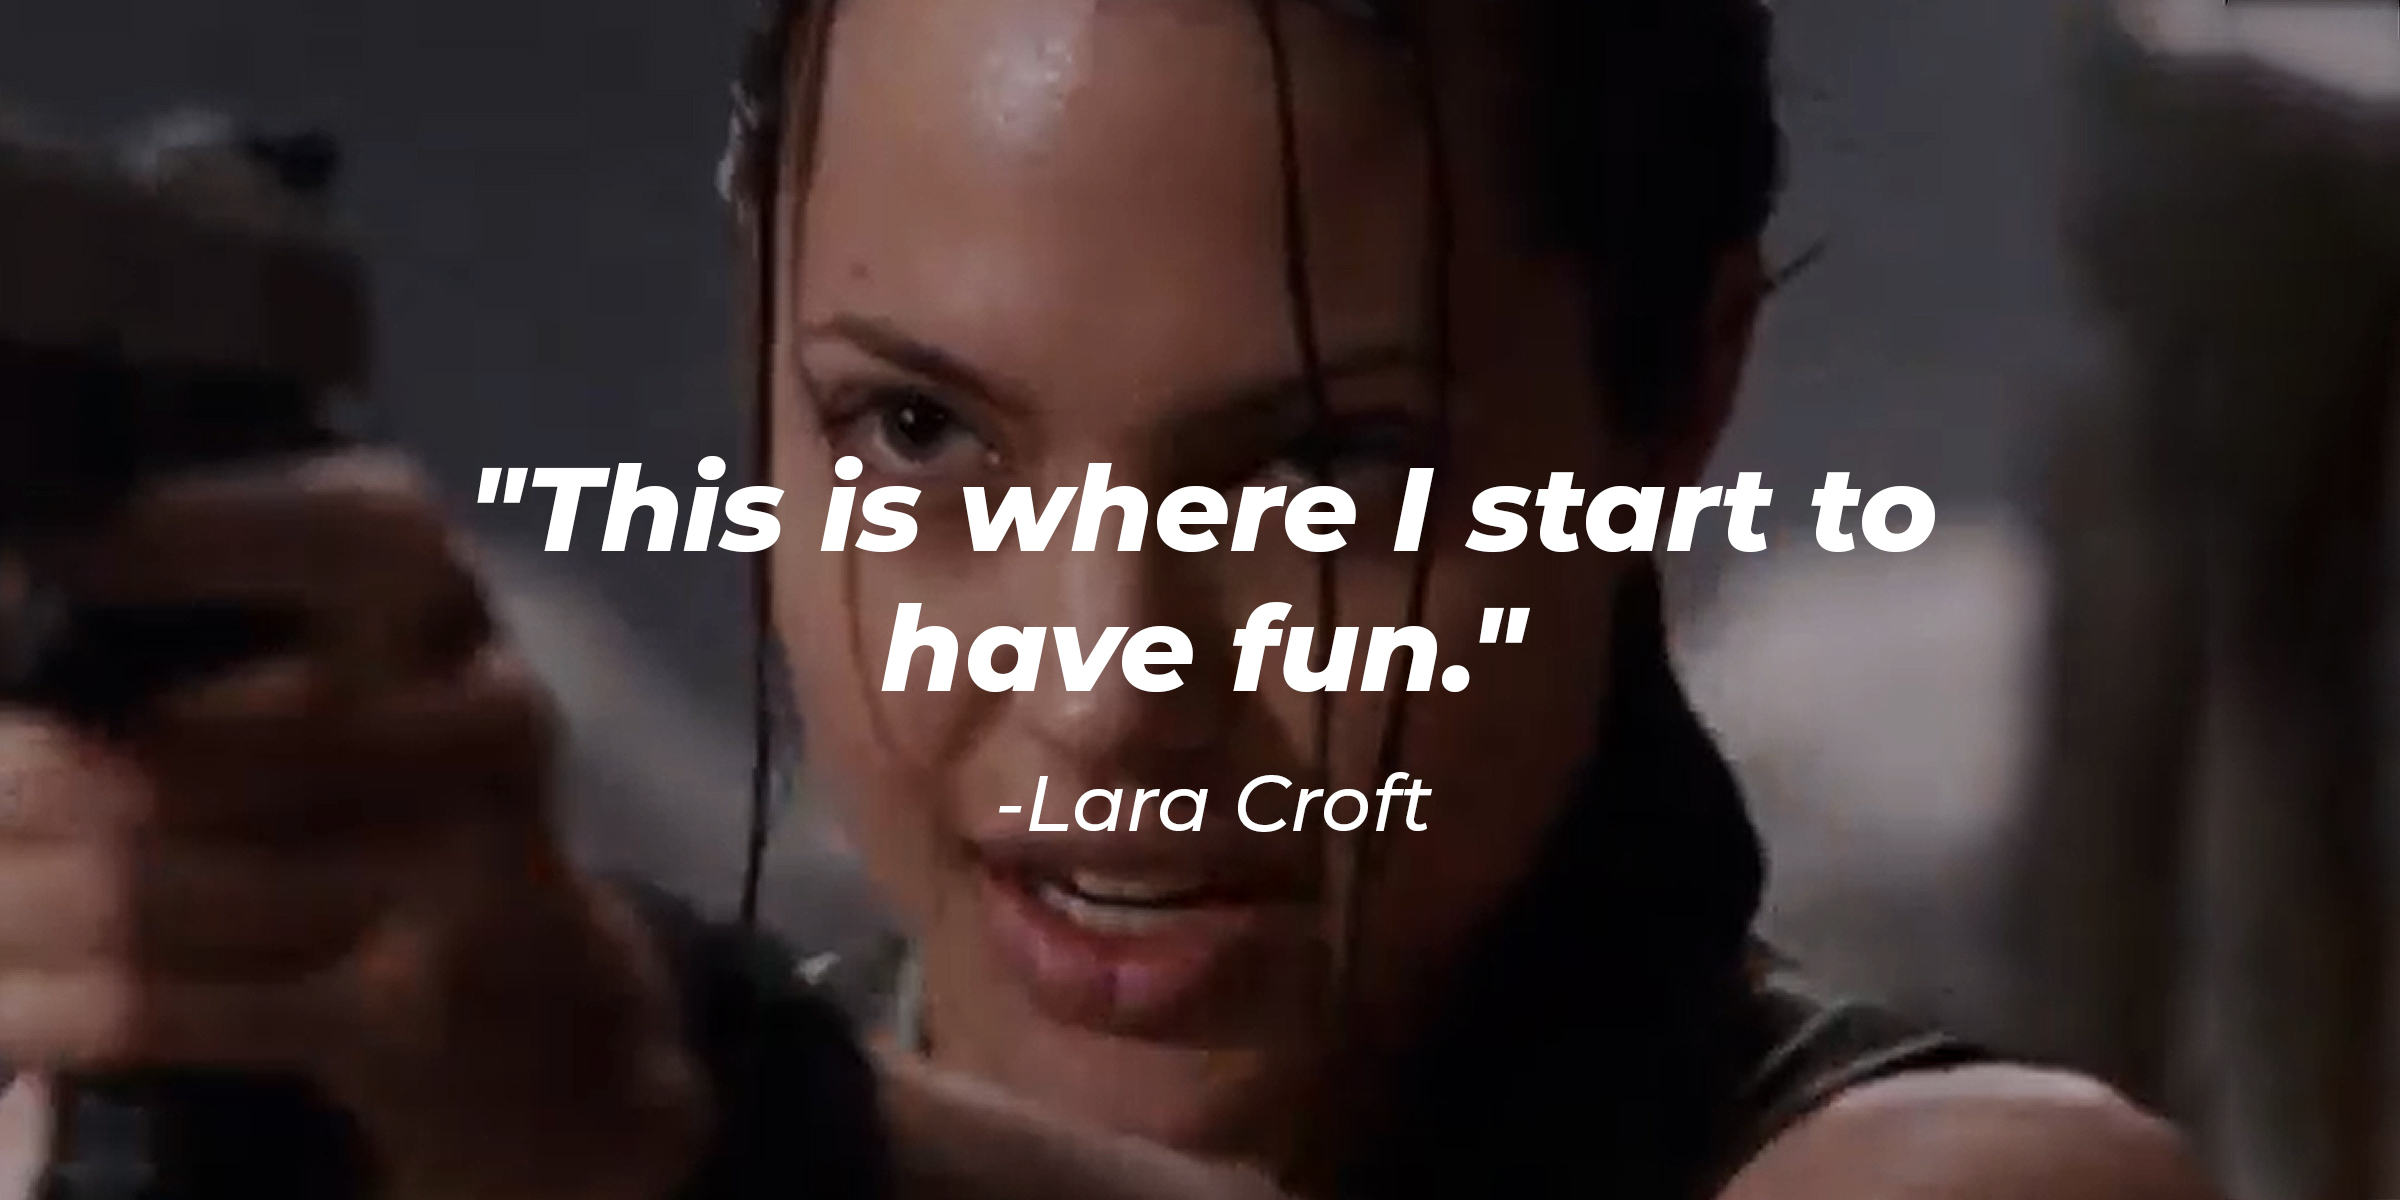 Photo of Angelina Jolie as Lara Croft with the quote: "This is where I start to have fun." | Source: facebook.com/TombRaider